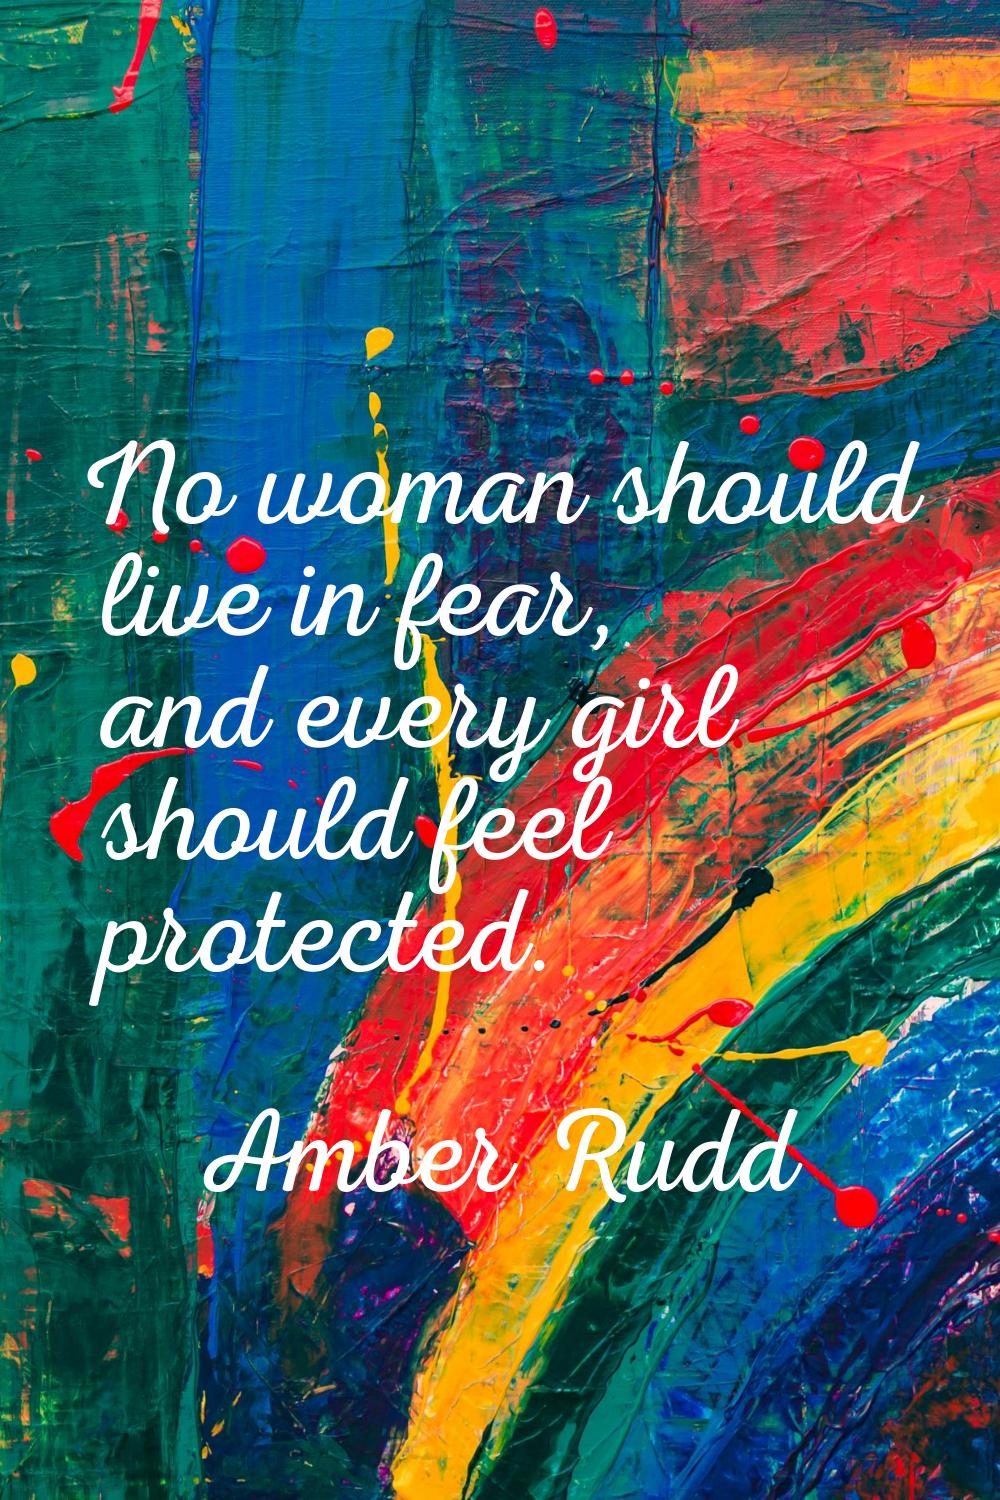 No woman should live in fear, and every girl should feel protected.